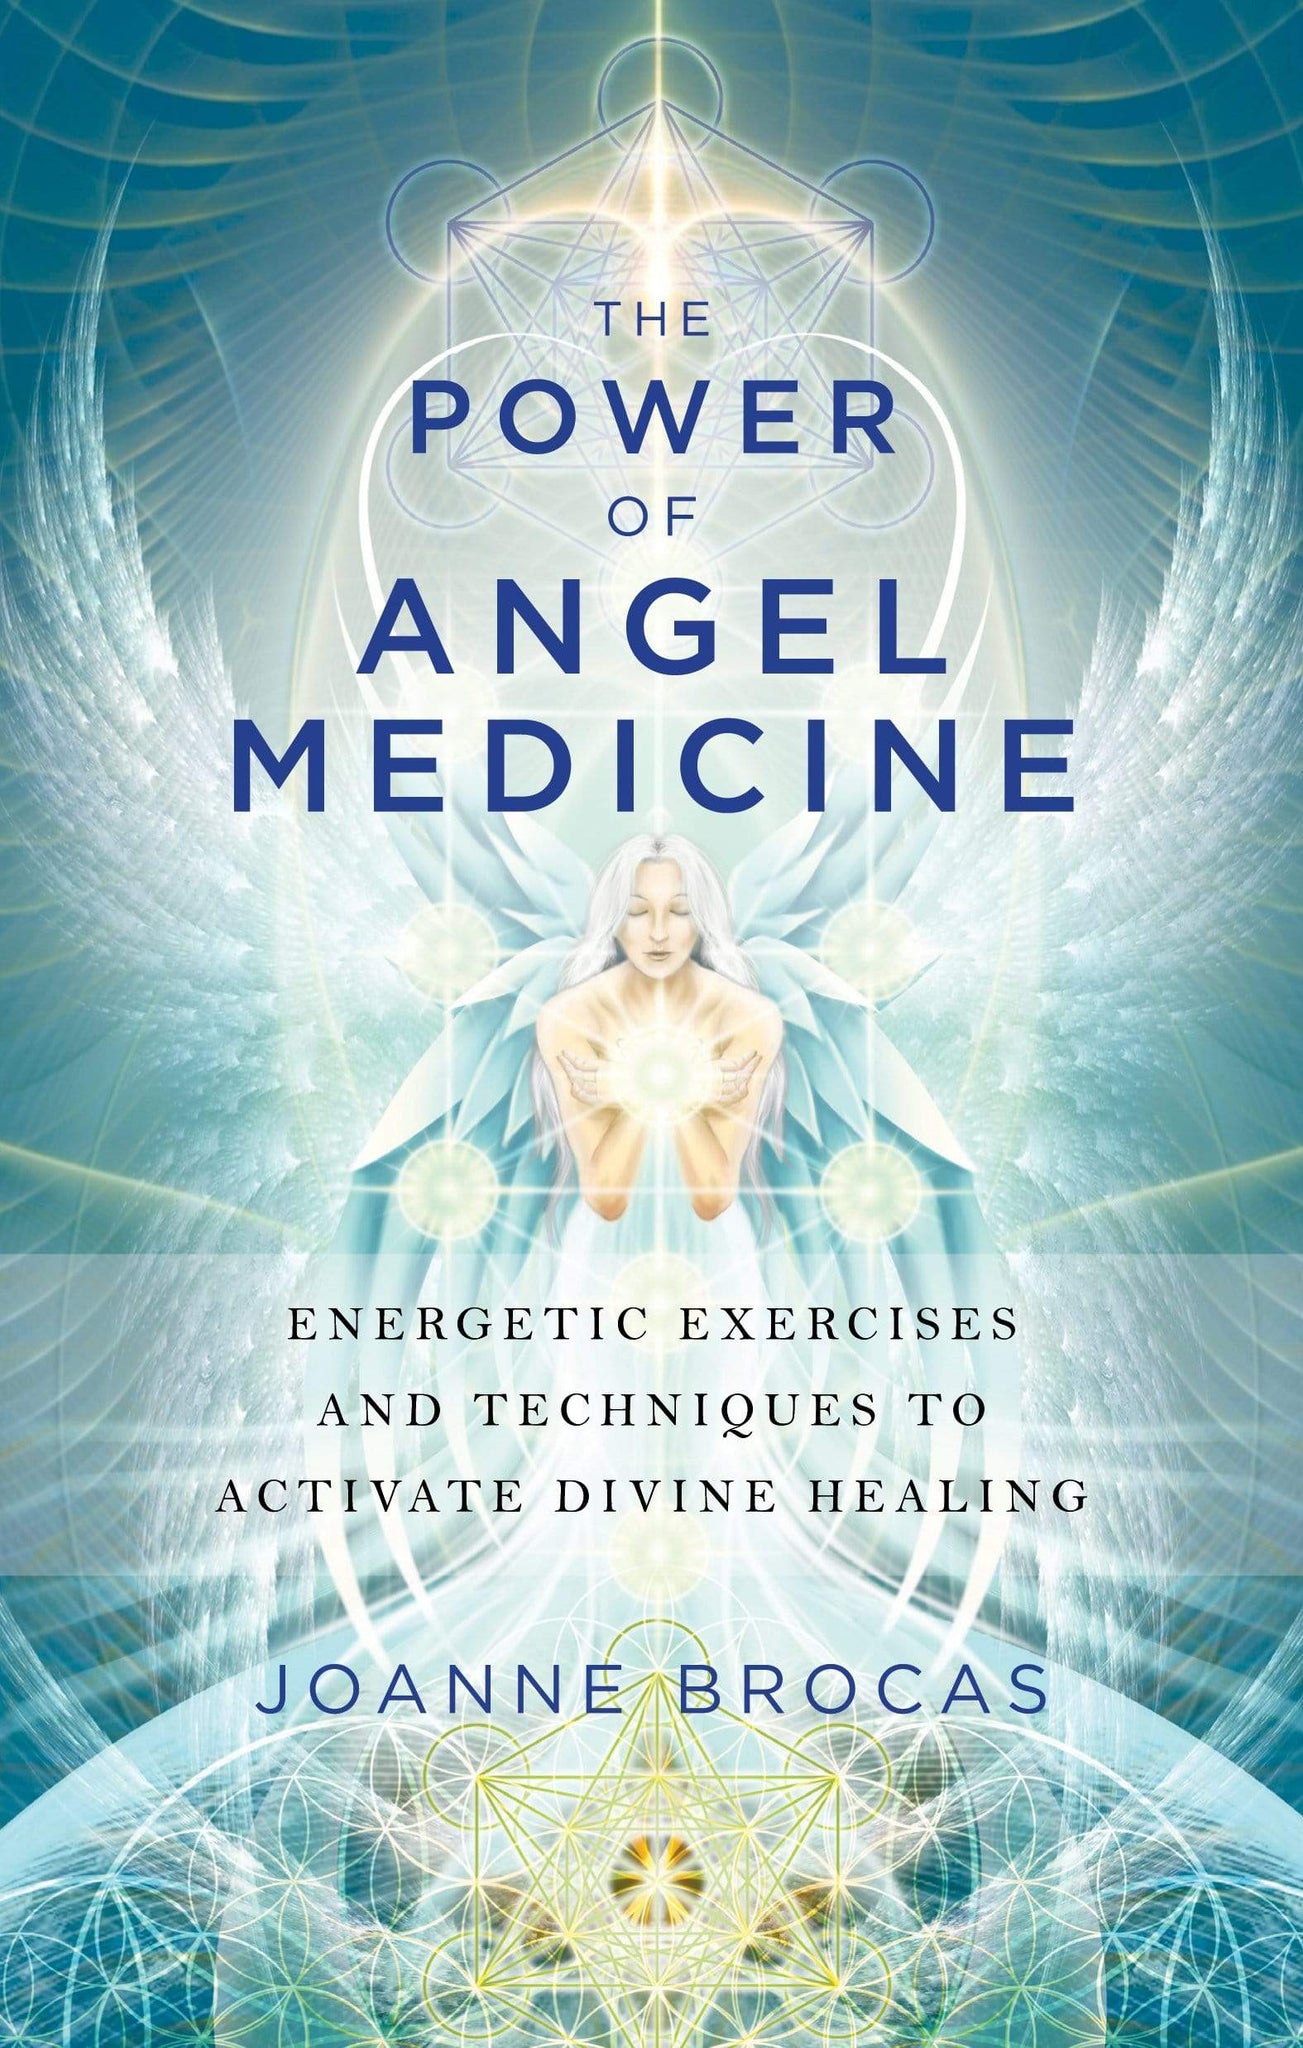 The Power of Angel Medicine - Energetic Exercises and Techniques to Activate Divine Healing by Joanne Brocas